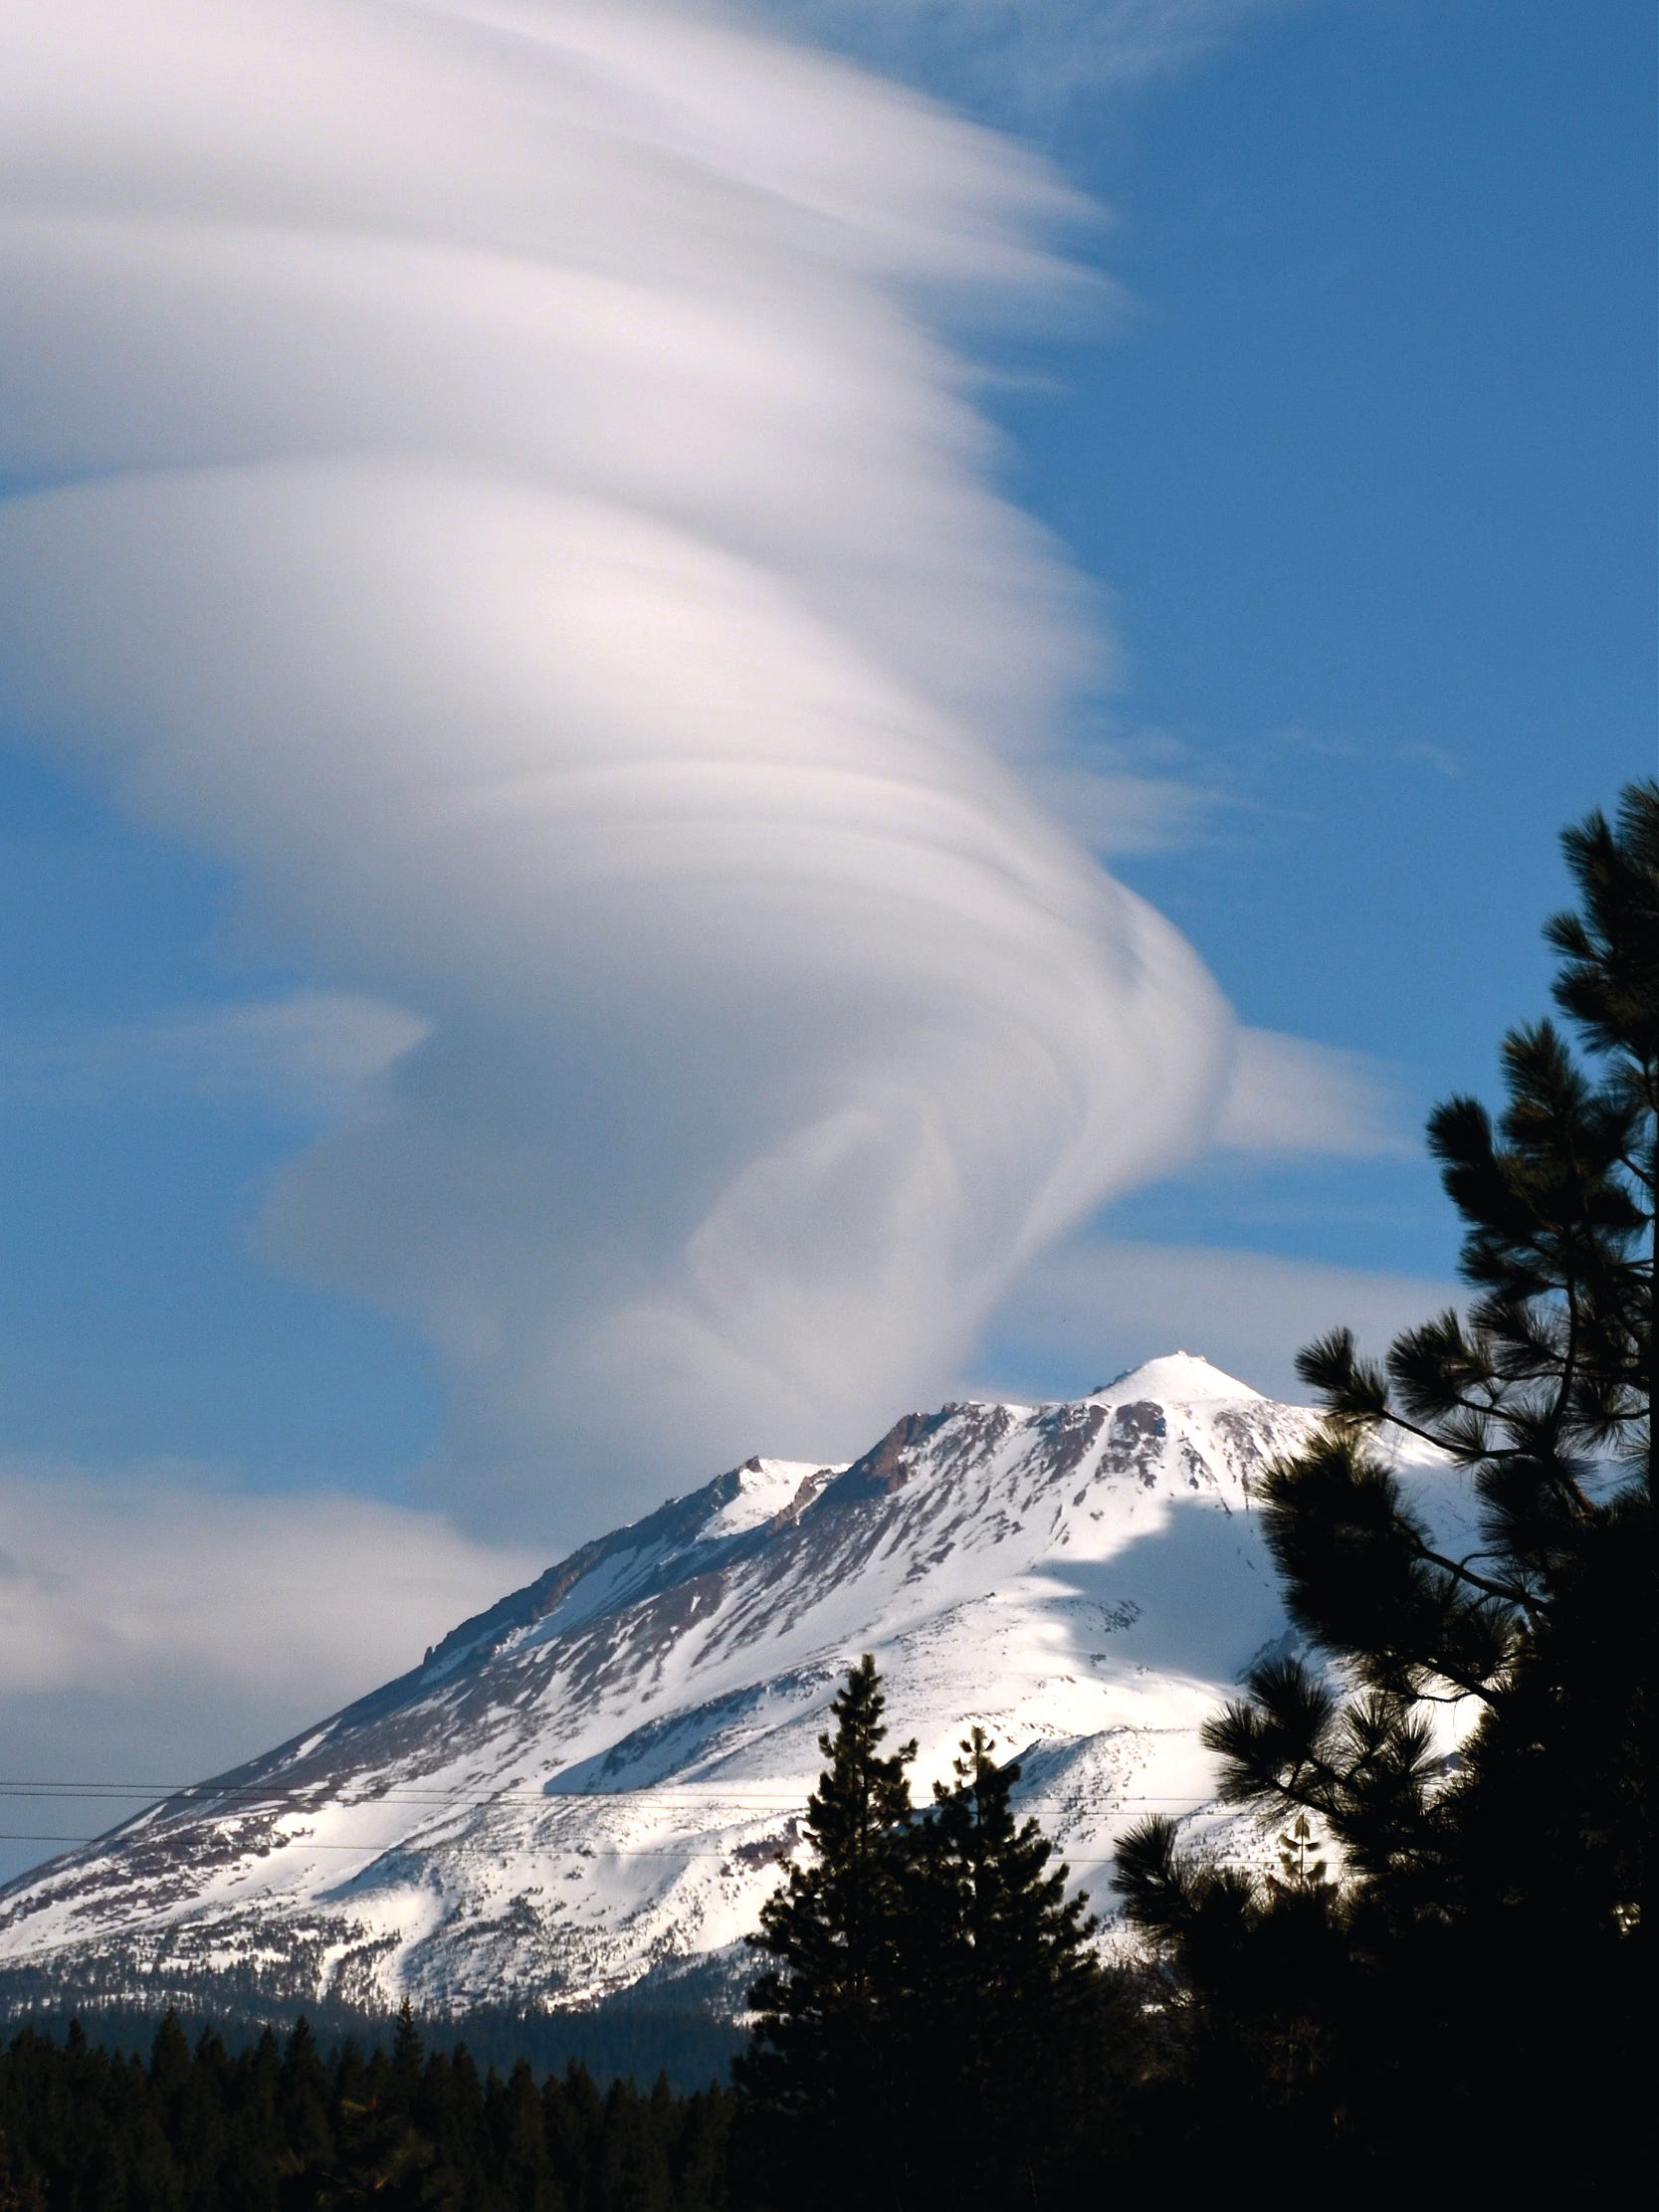 A wild lenticular cloud as seen from Lake Shastina